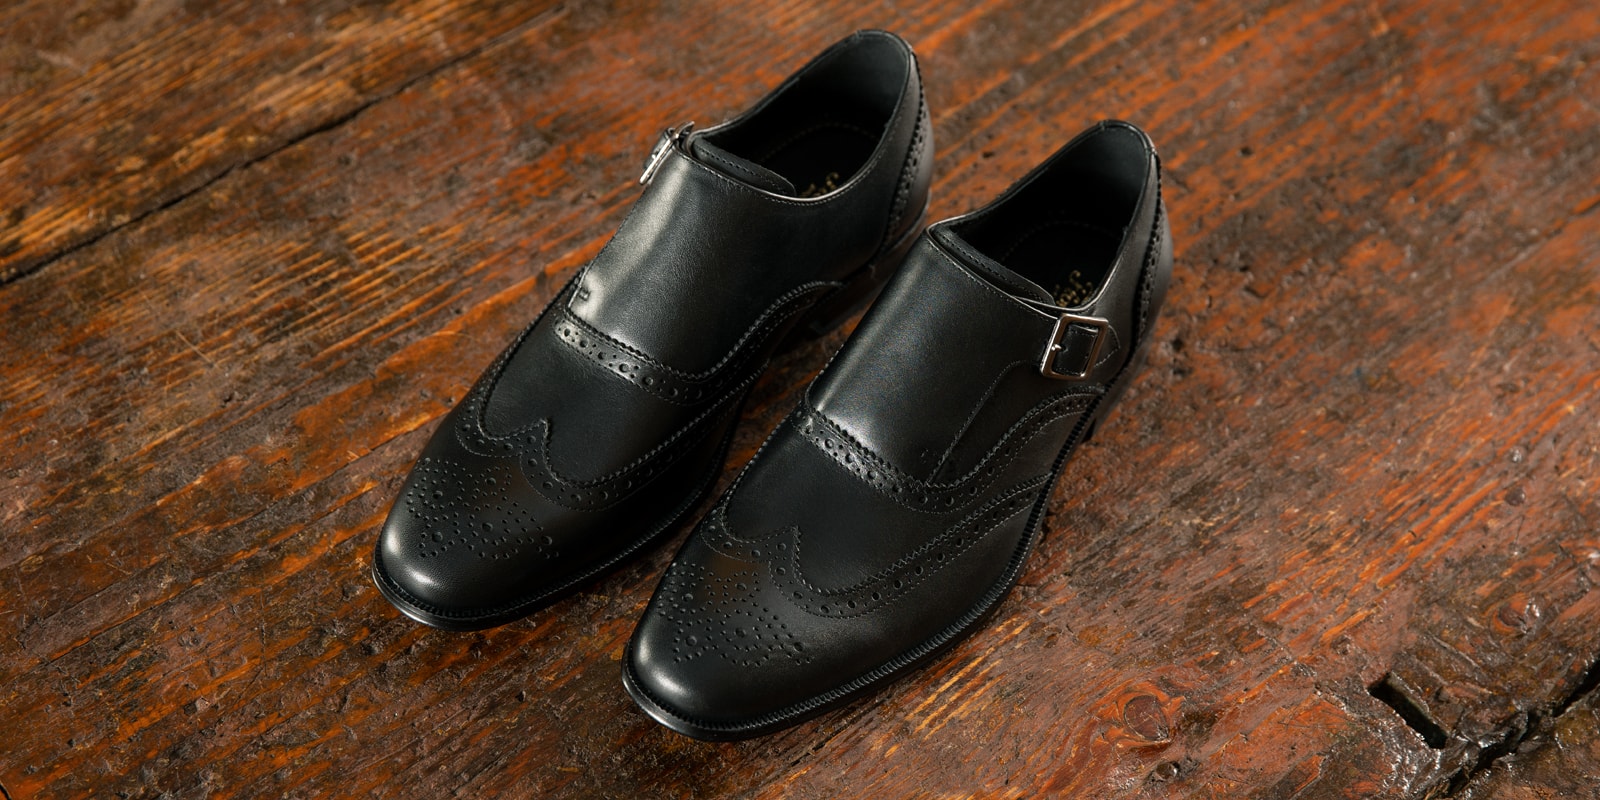 The featured image is a man wearing the Postino Moc Toe Bit Slip On in Black.